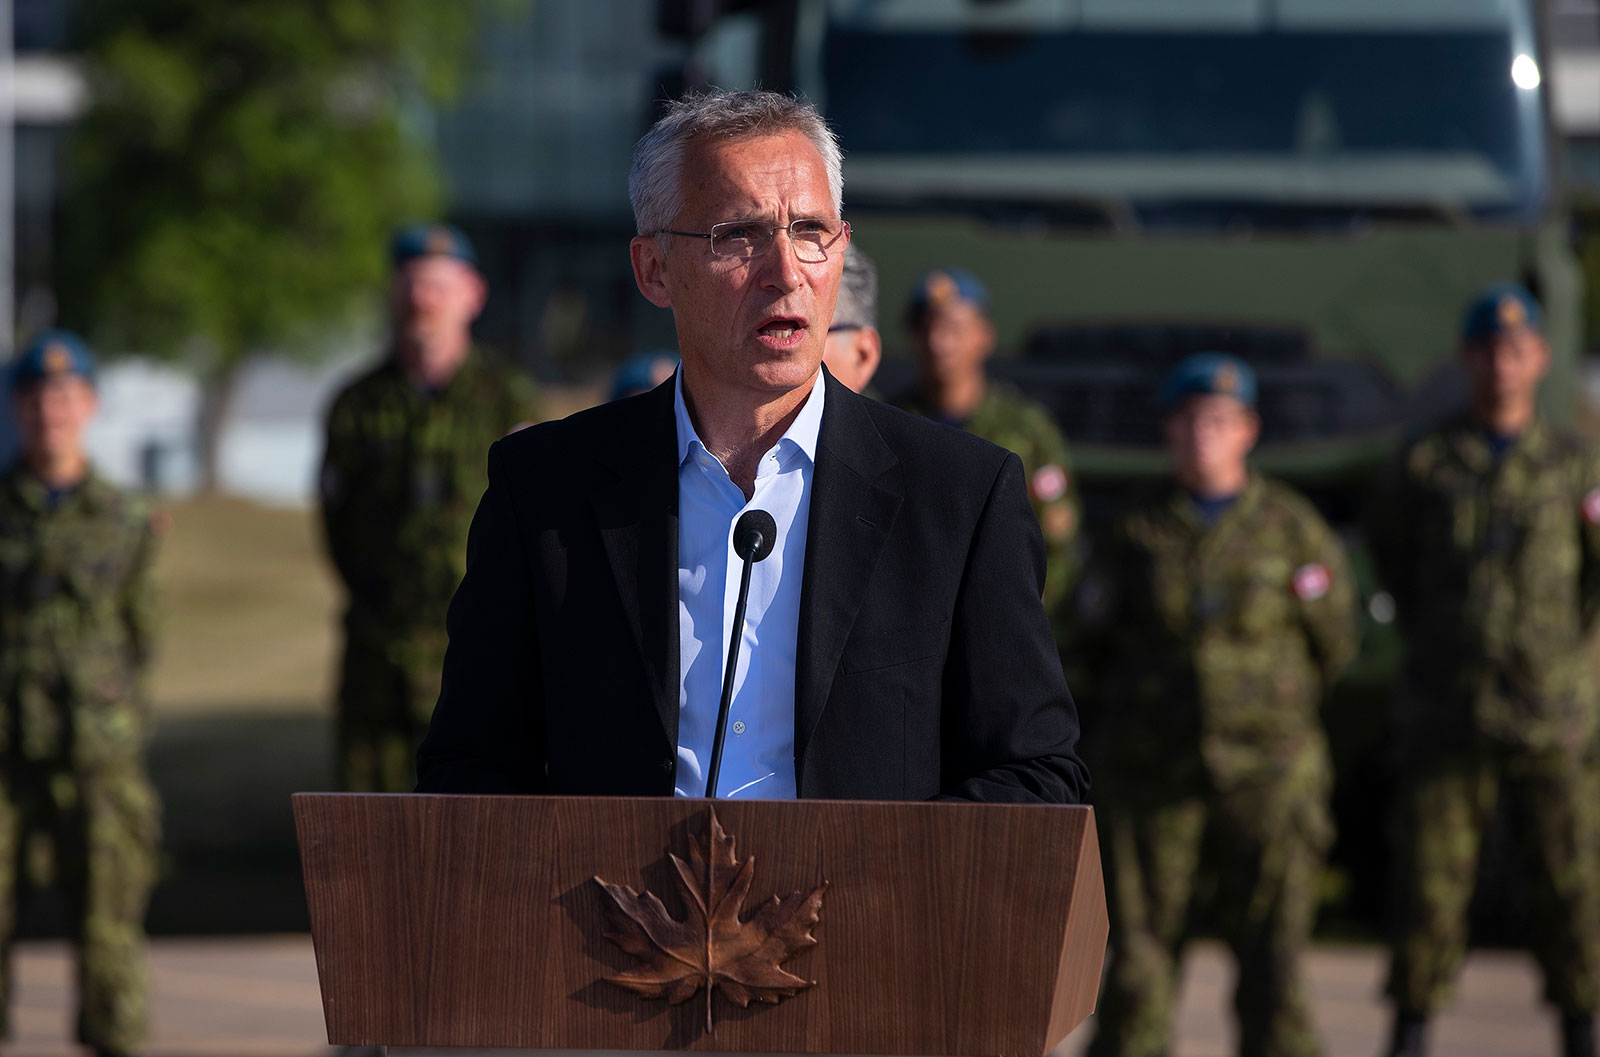 NATO Secretary General Jens Stoltenberg speaks during a press conference at 4 Wing Cold Lake air base in Cold Lake, Alberta, on August 26.